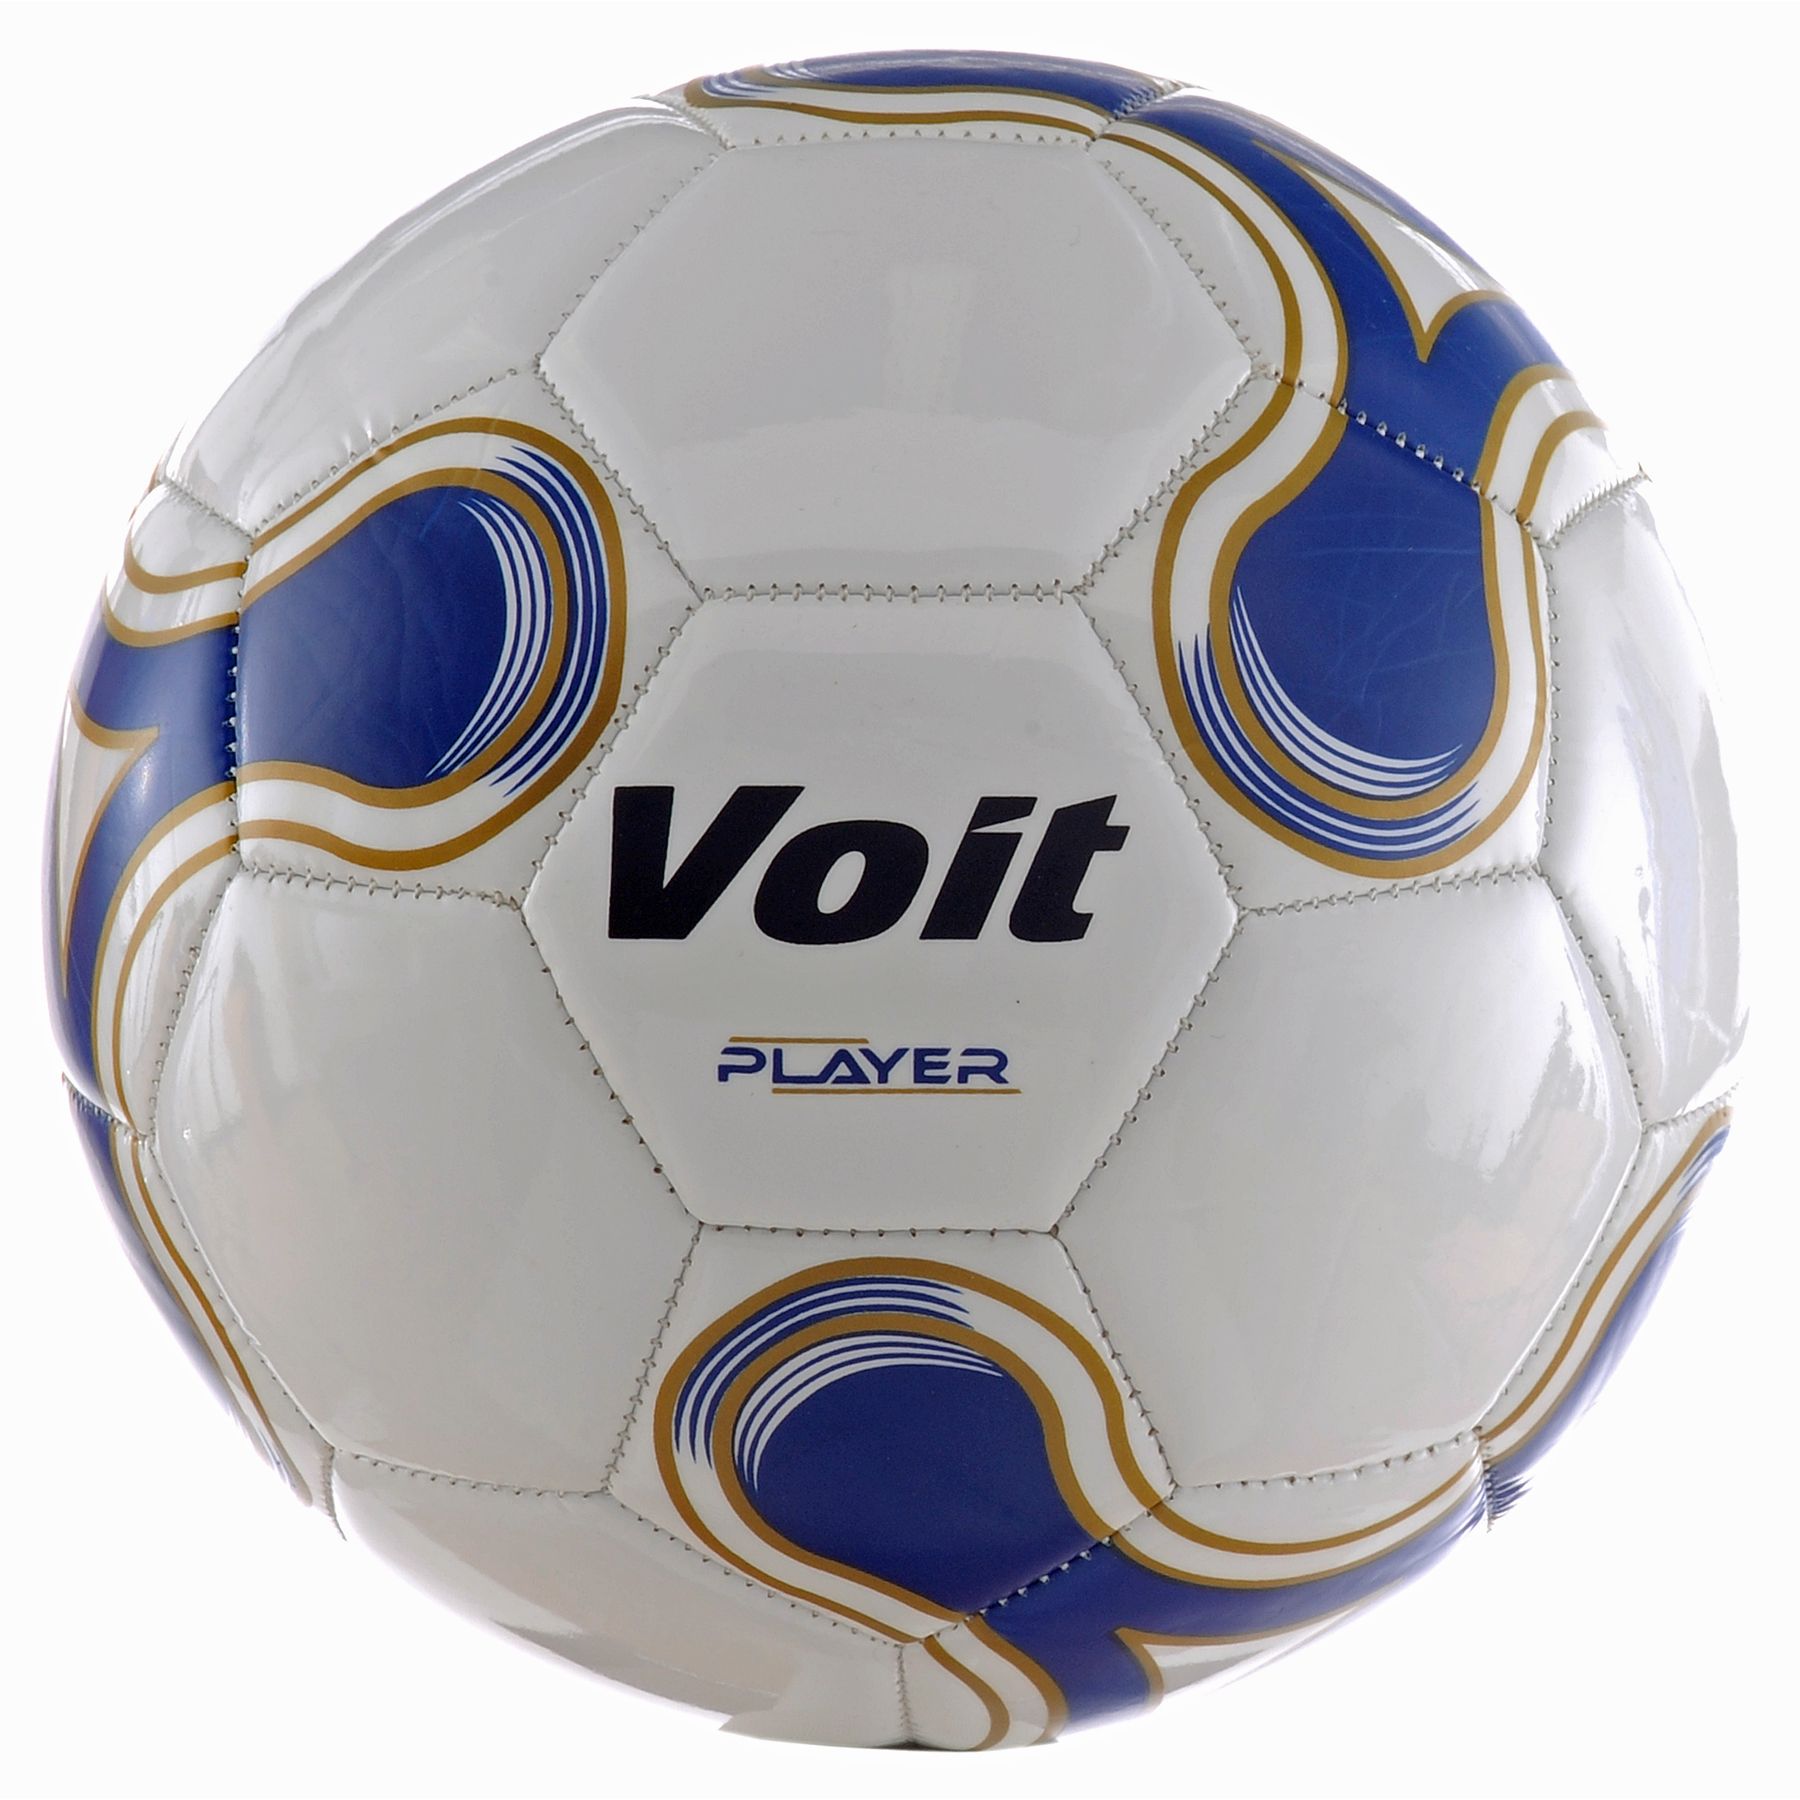 Voit Player Official Size 5 Soccer Ball White/Blue Graphic